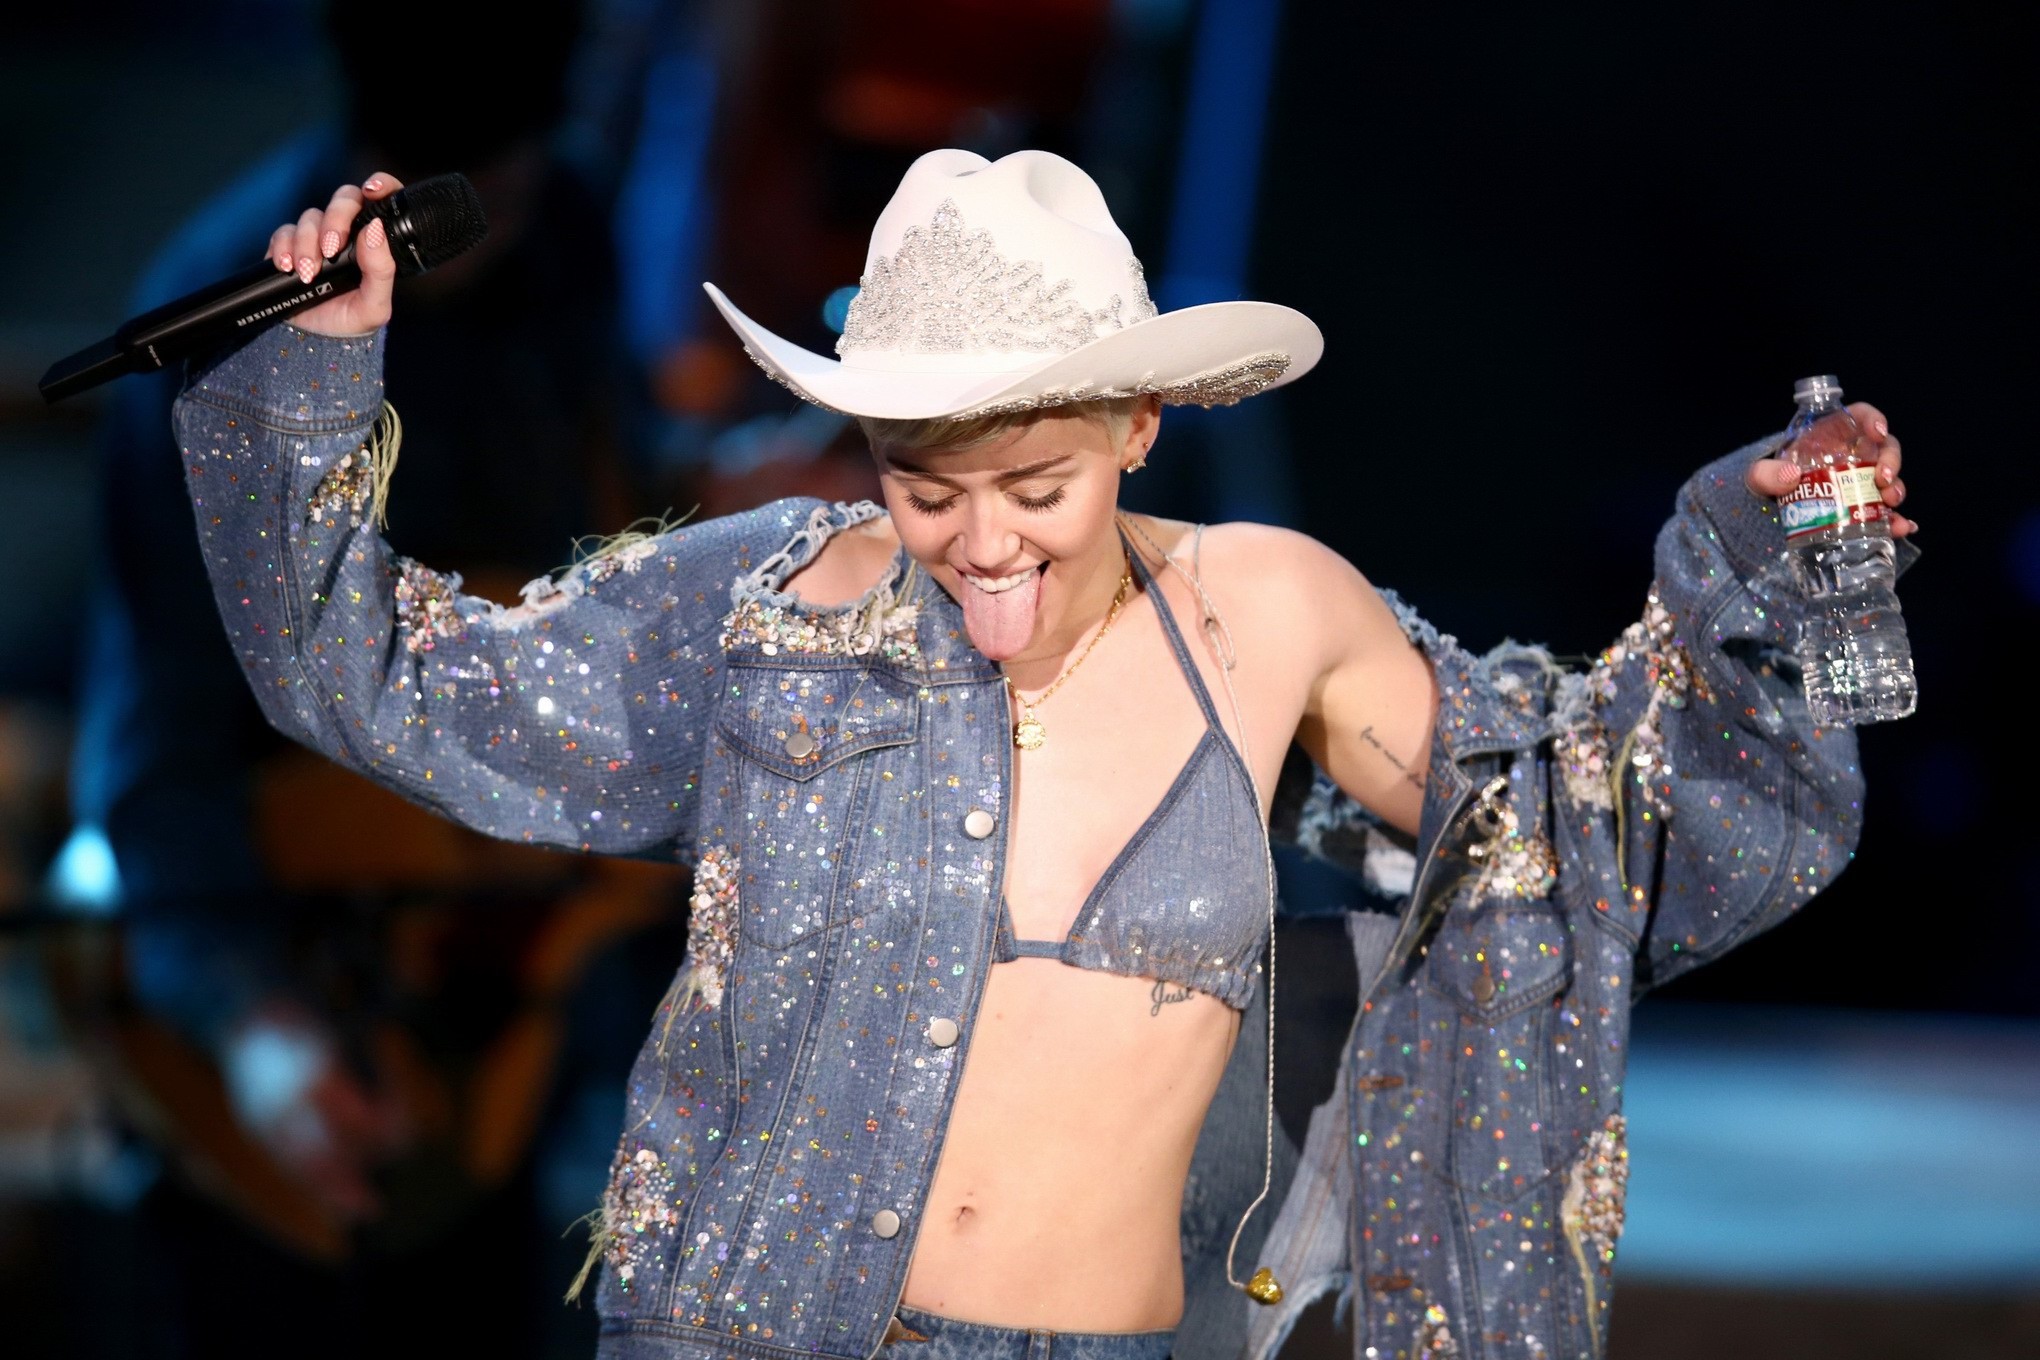 Miley Cyrus perofrming in denim bra  ripped jeans at MTV Unplugged in Hollywood 